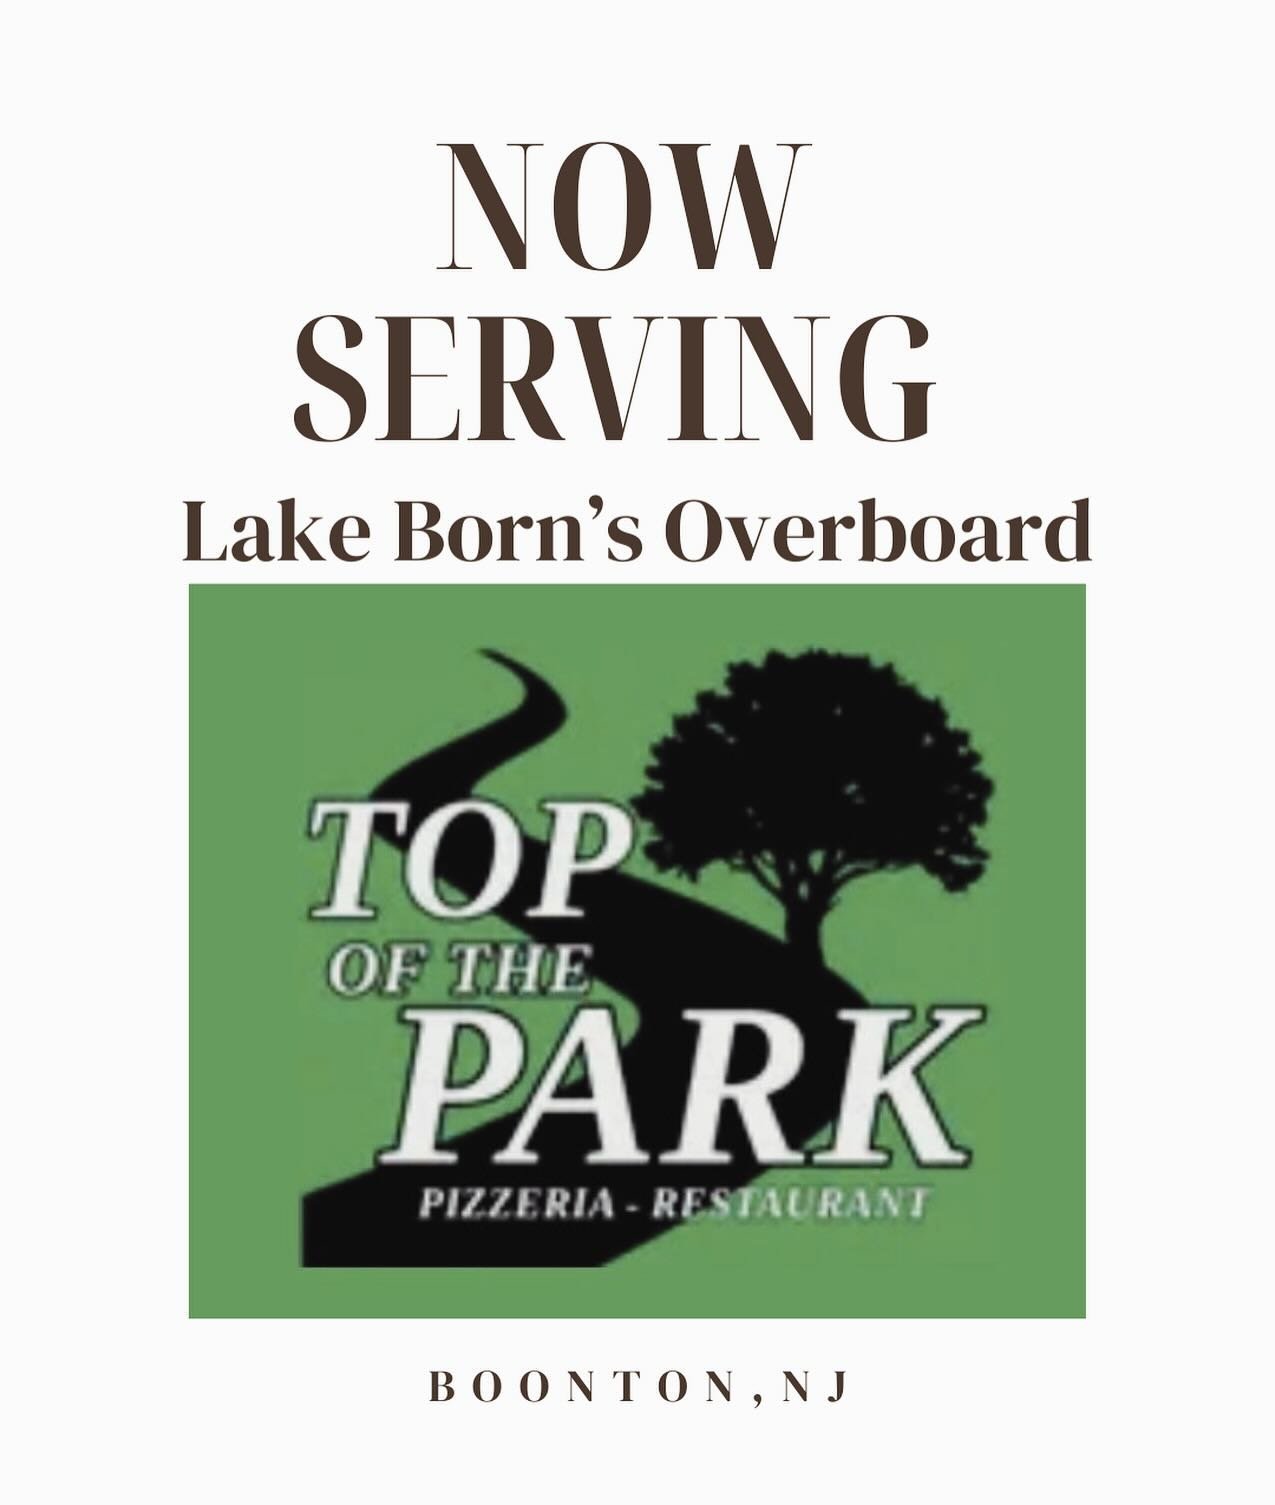 Big news! @topofthepark.pizza  is now serving Overboard🛟 We are so excited to have our coffee at this fantastic restaurant. Check them out on Main Street in Boonton!